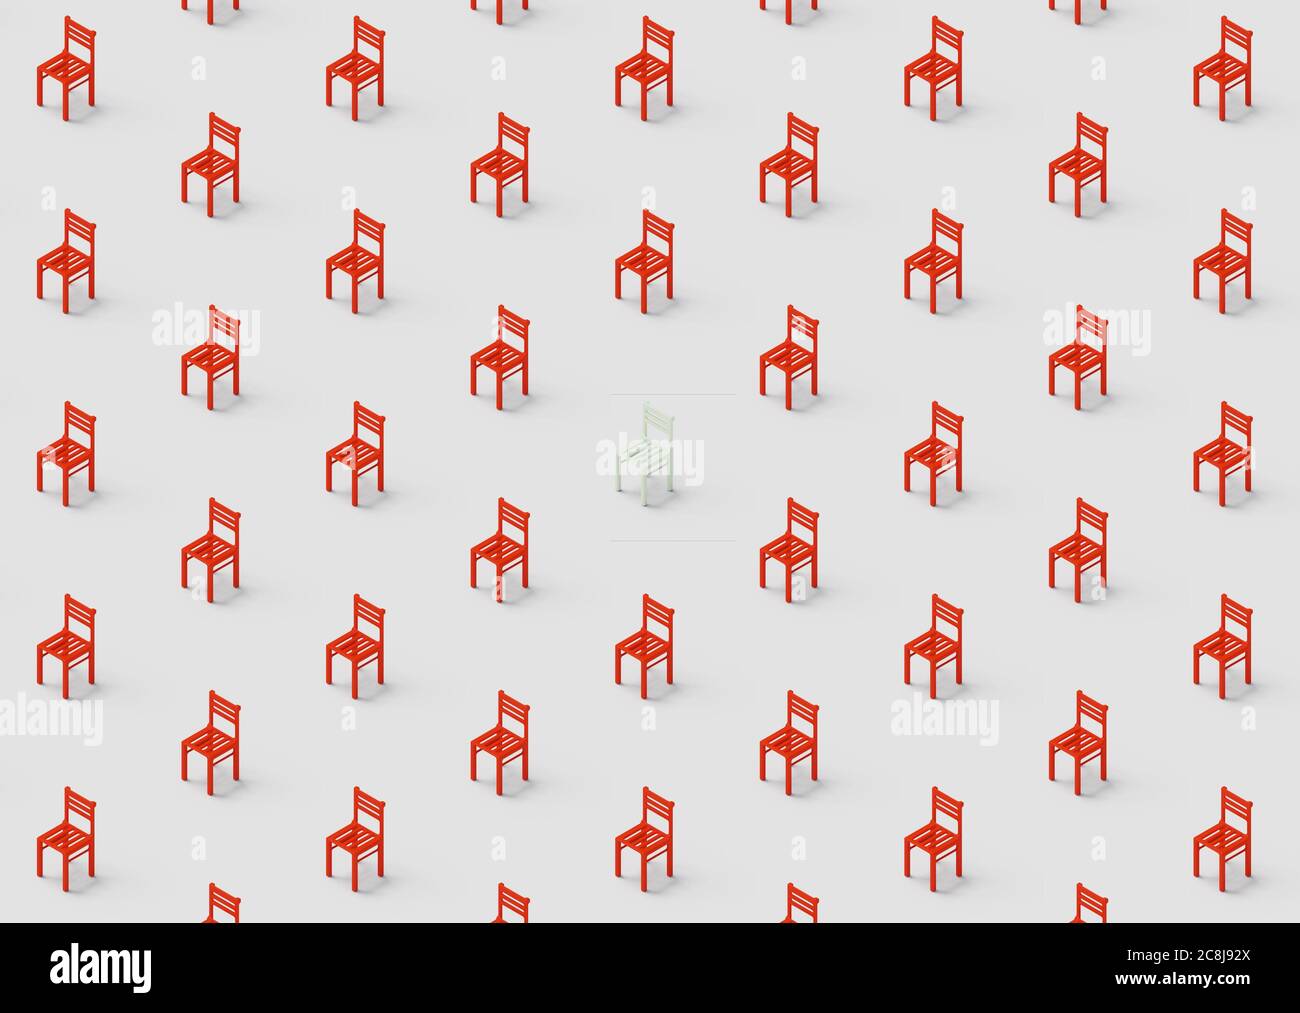 A group of red chairs isometric pattern with one white chair 3d illustration Stock Photo